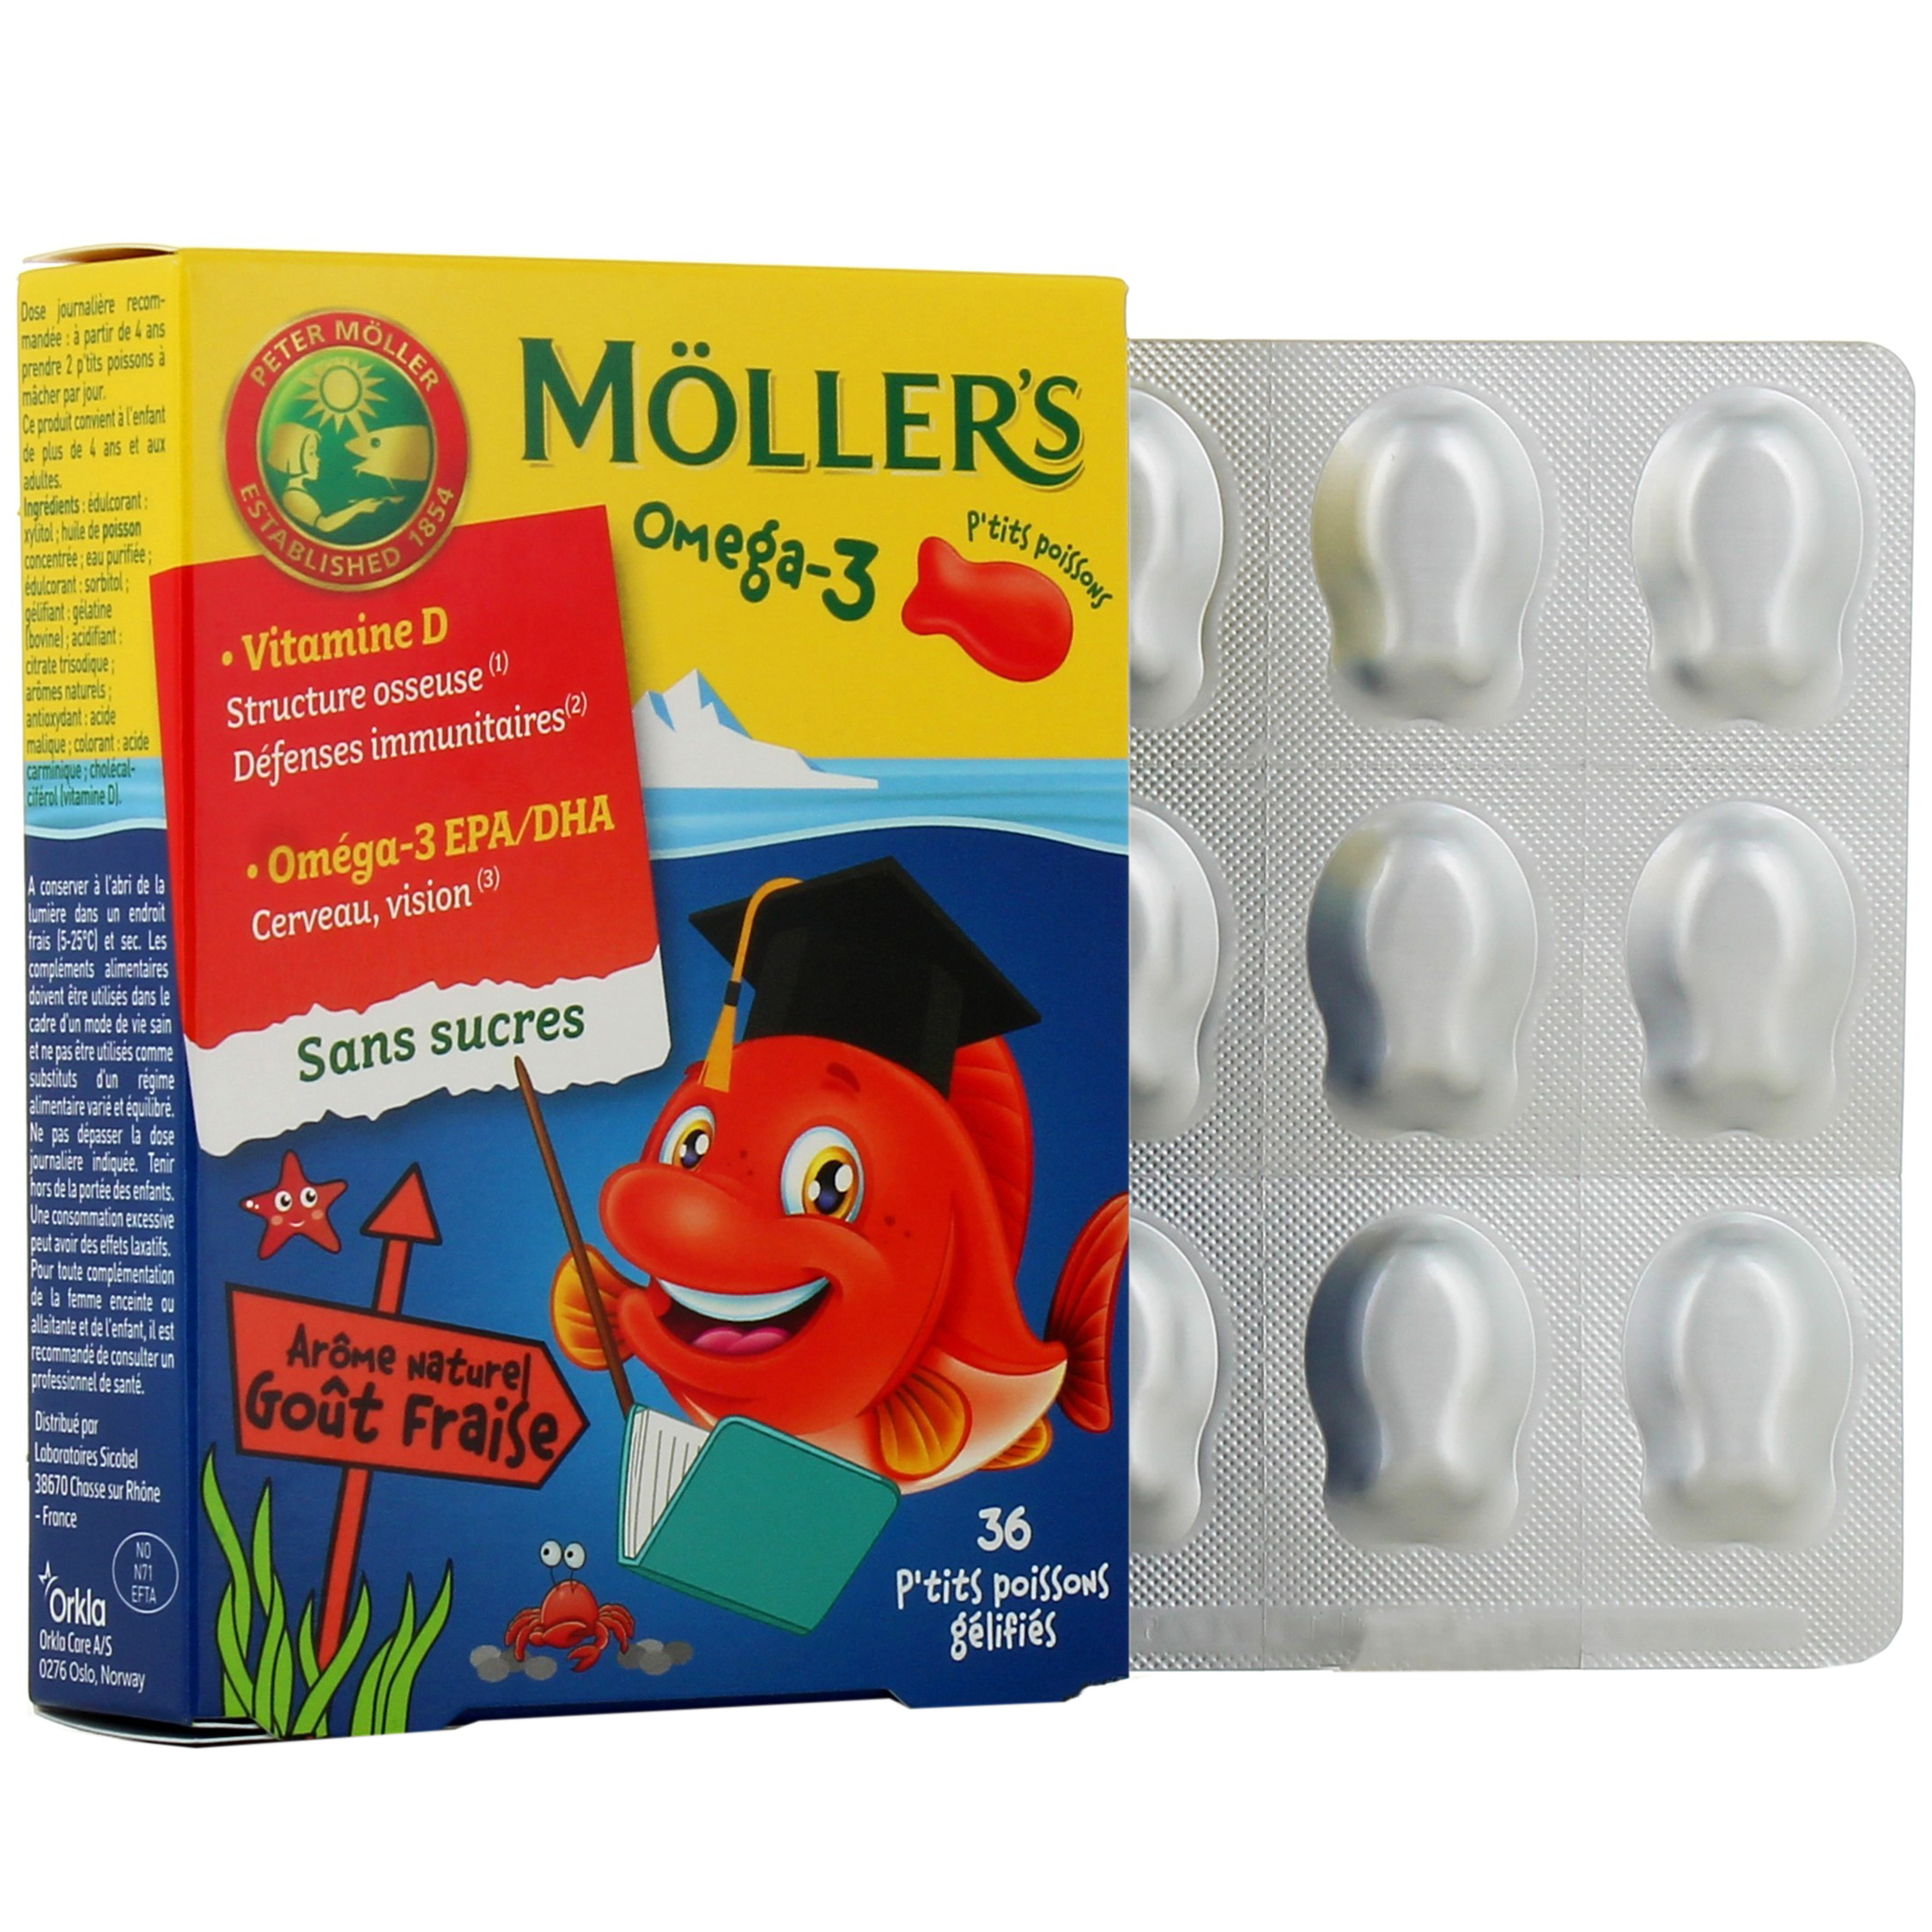 https://cdn.pharmaciedesdrakkars.com/media/images/products/mollers-omega-3-p-tits-poissons-mollers4-1702560943.jpg